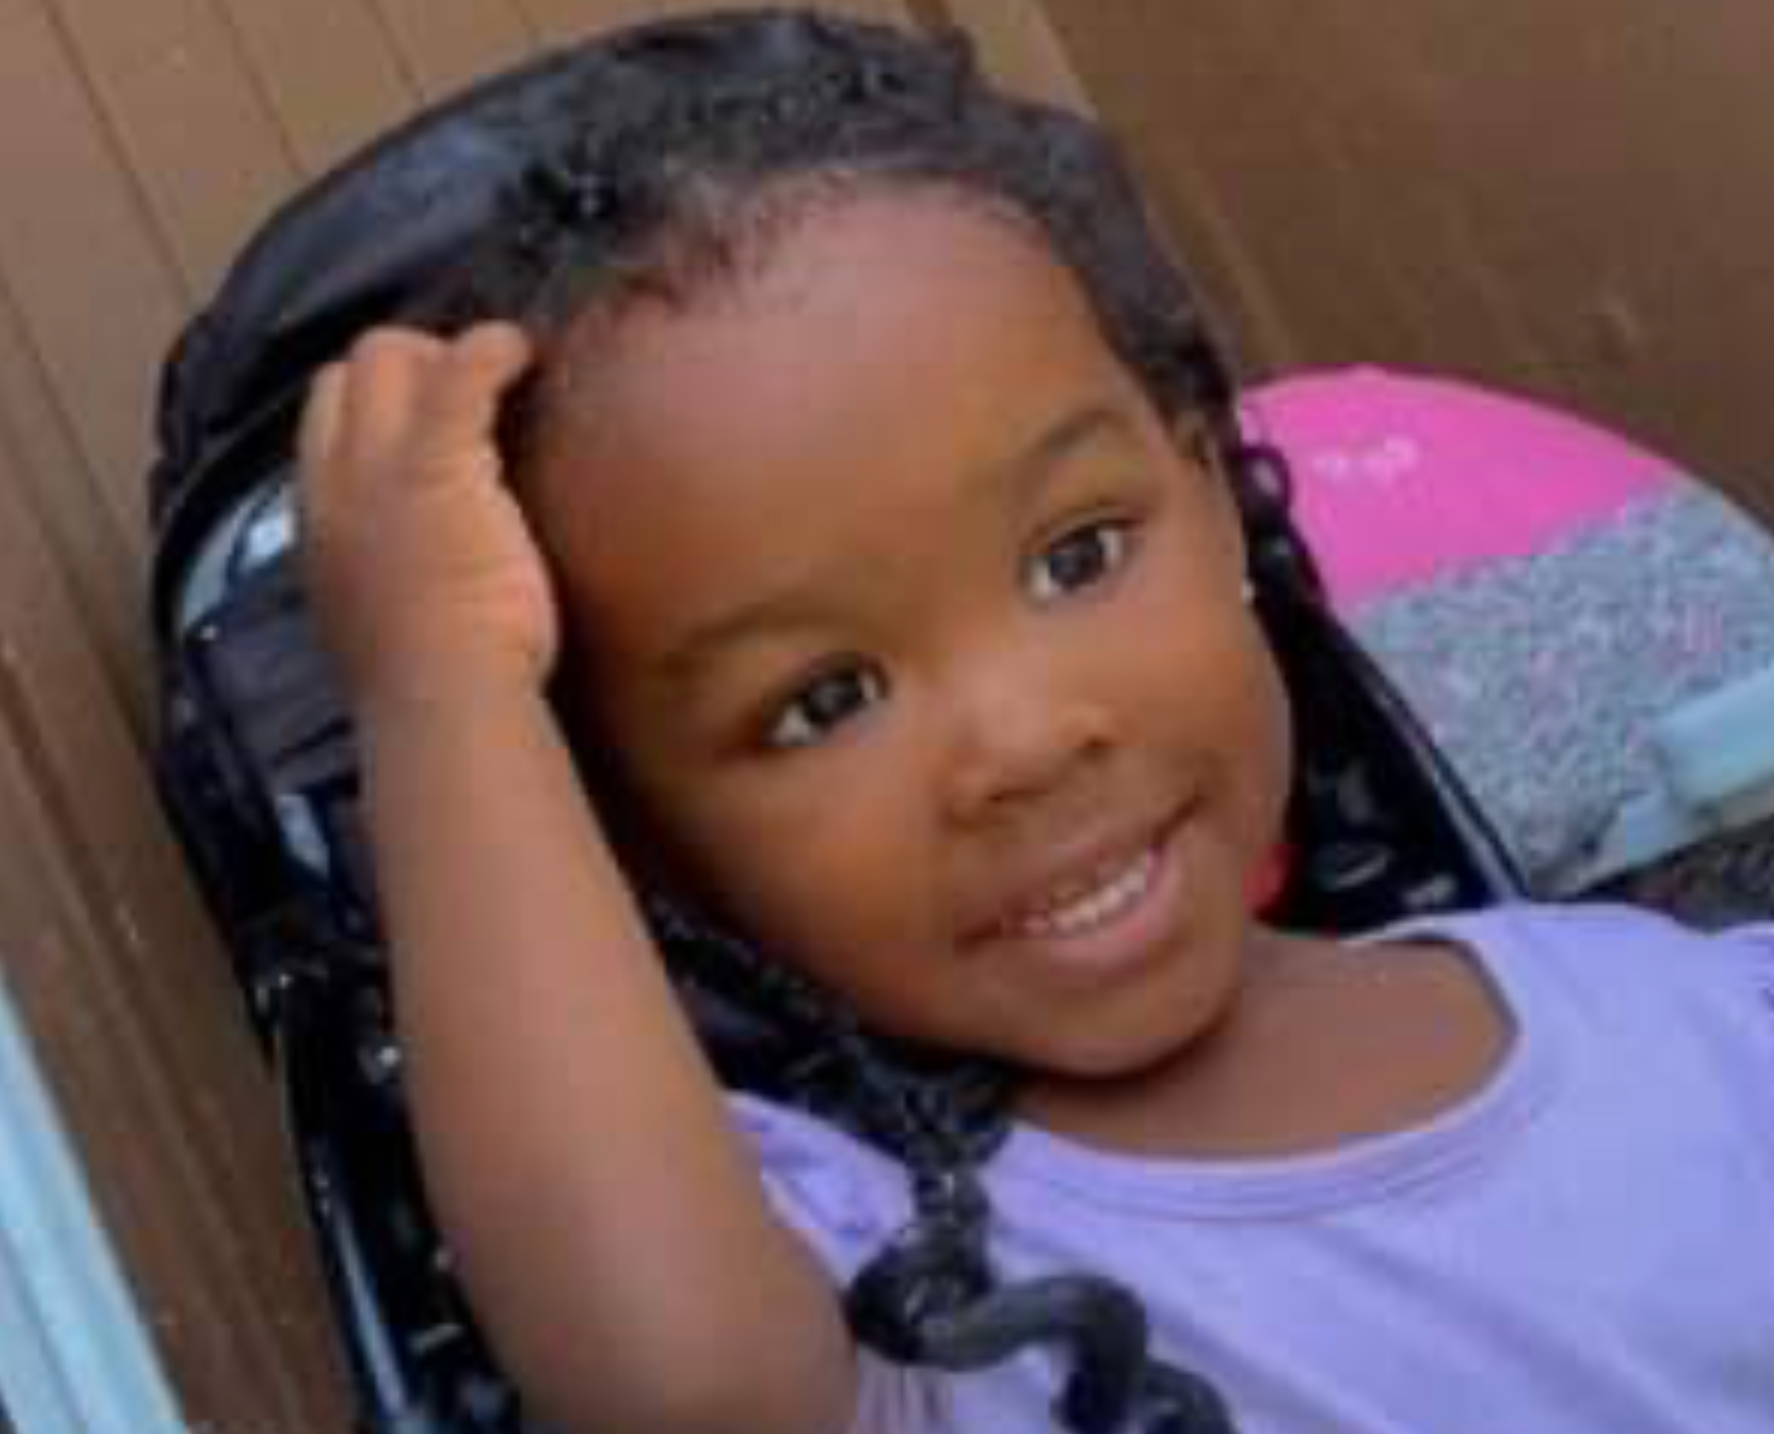 Wynter Cole Smith, 2, is still missing more than 24 hours after she was allegedly abducted by her mother’s ex-partner Rashad Trice